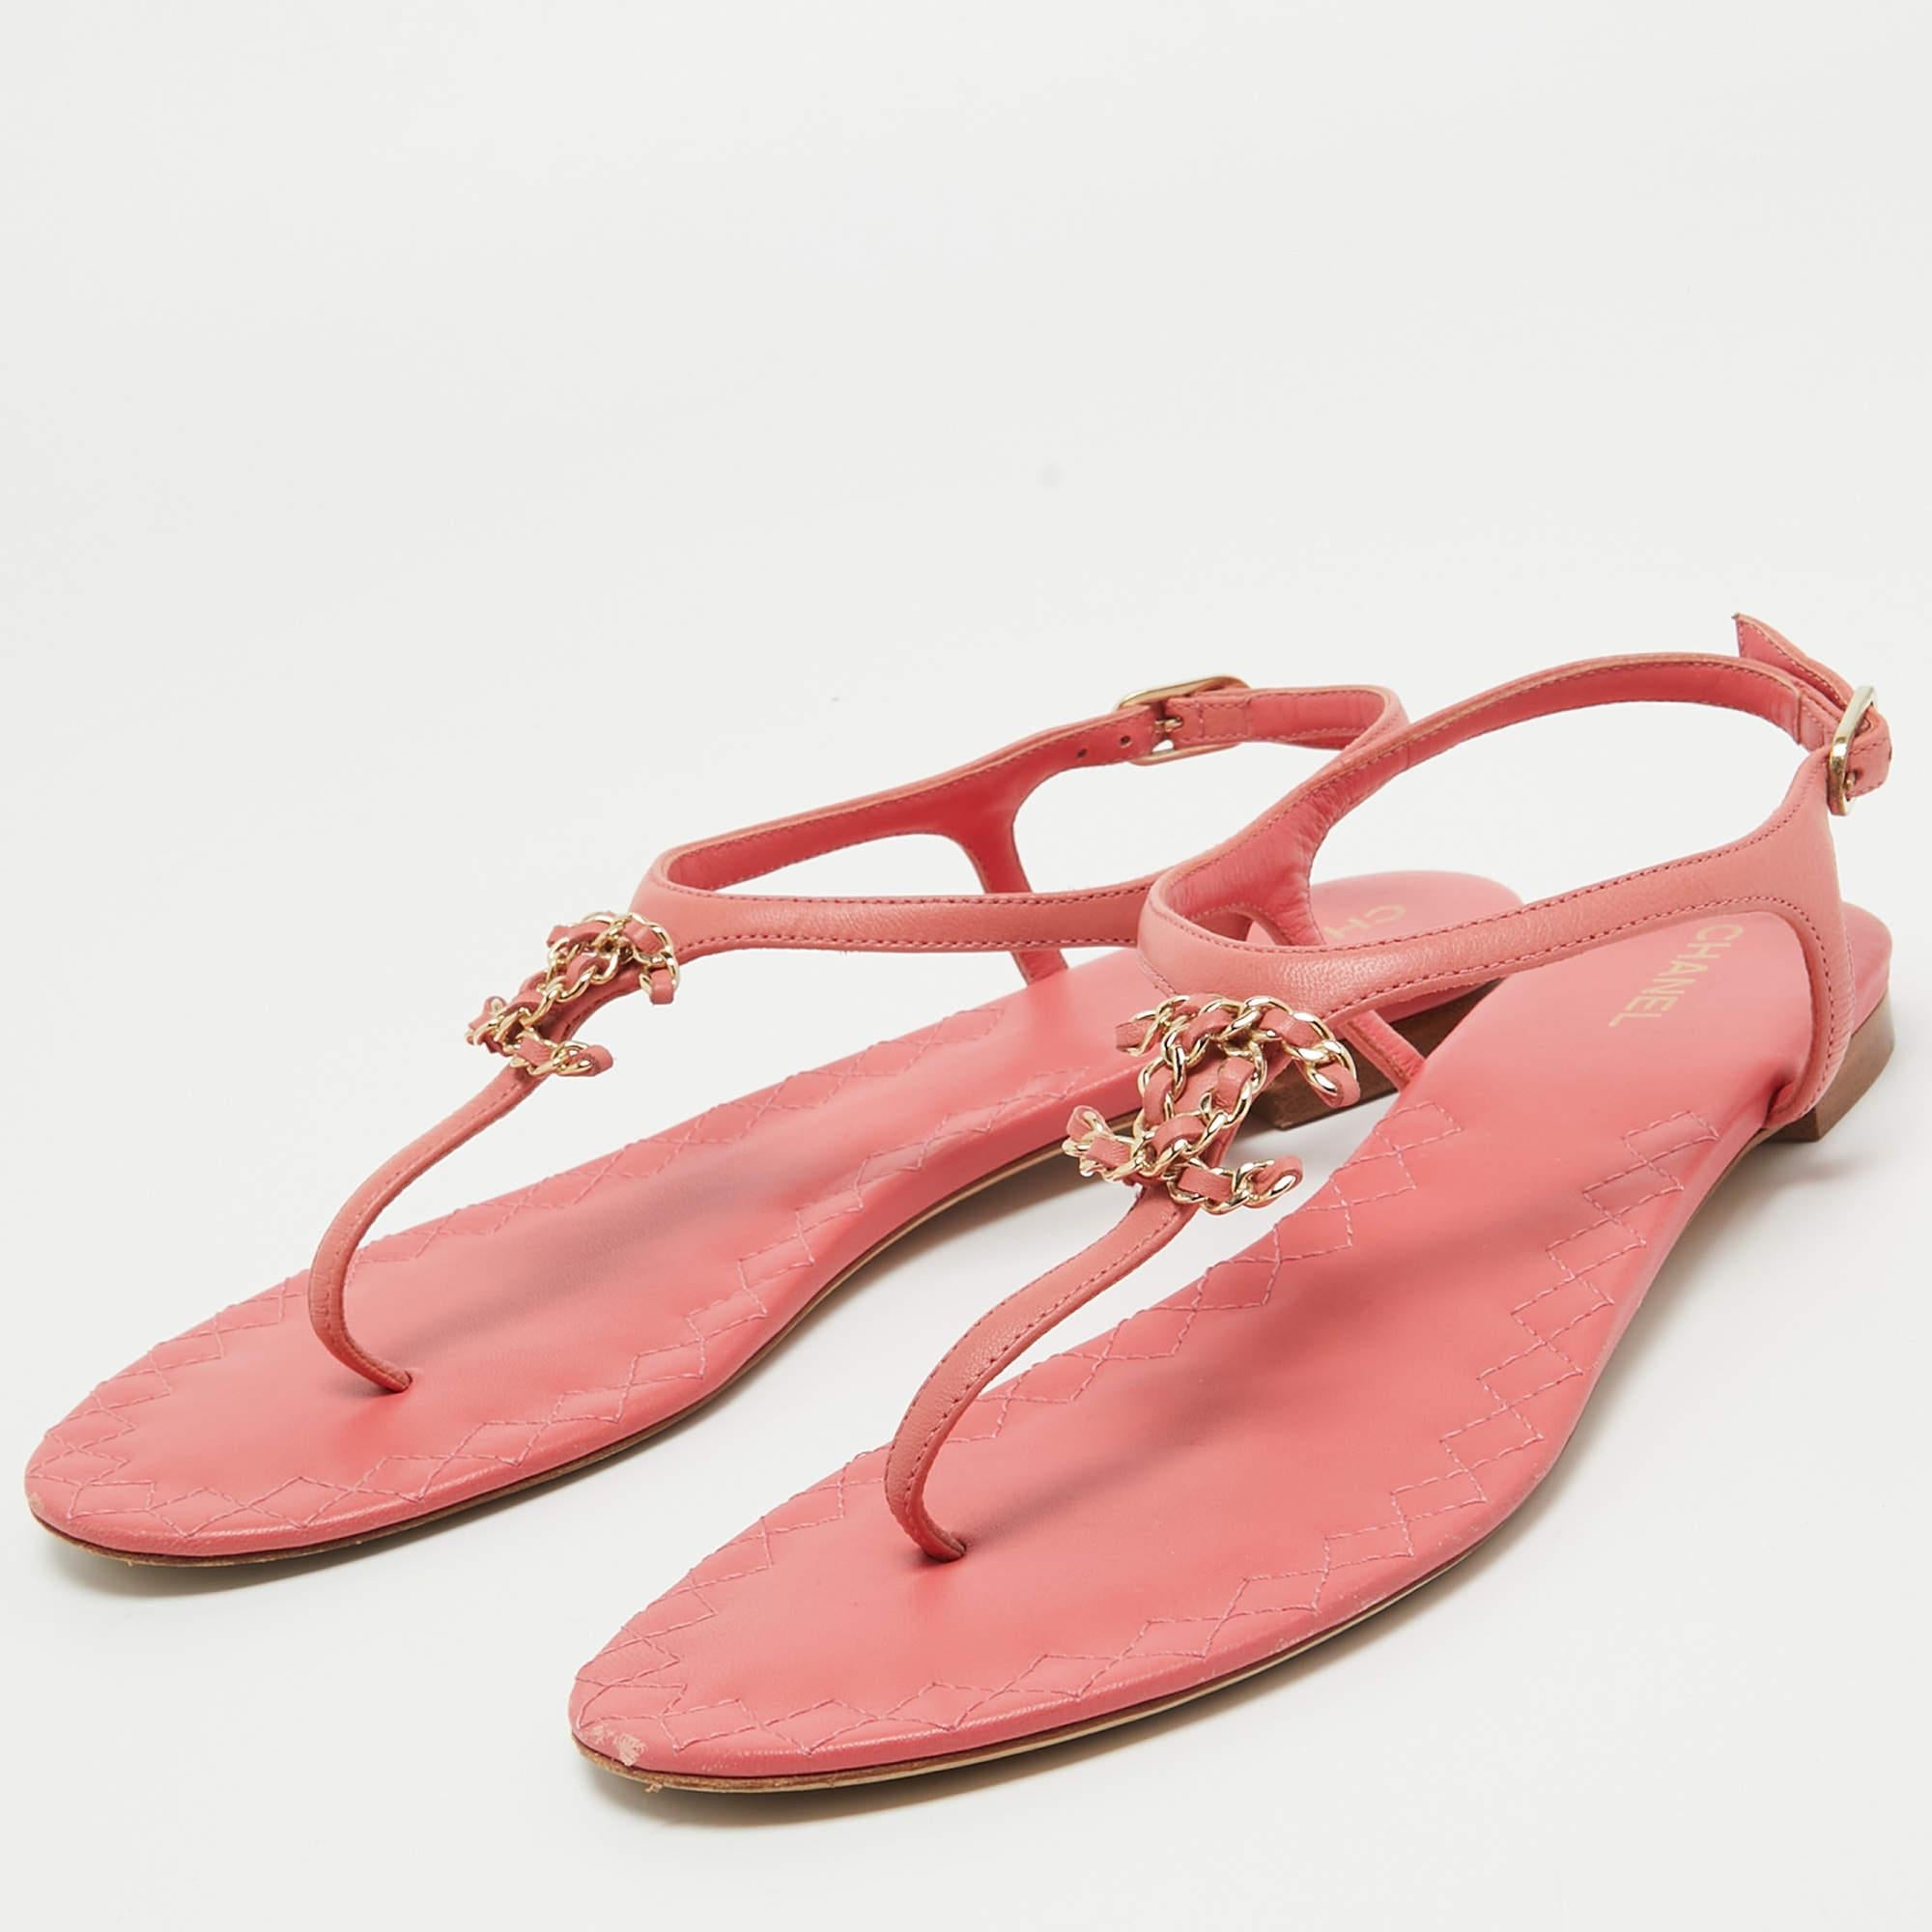 Chanel Pink Leather Chain-Link Thong Sandals Size 38 1